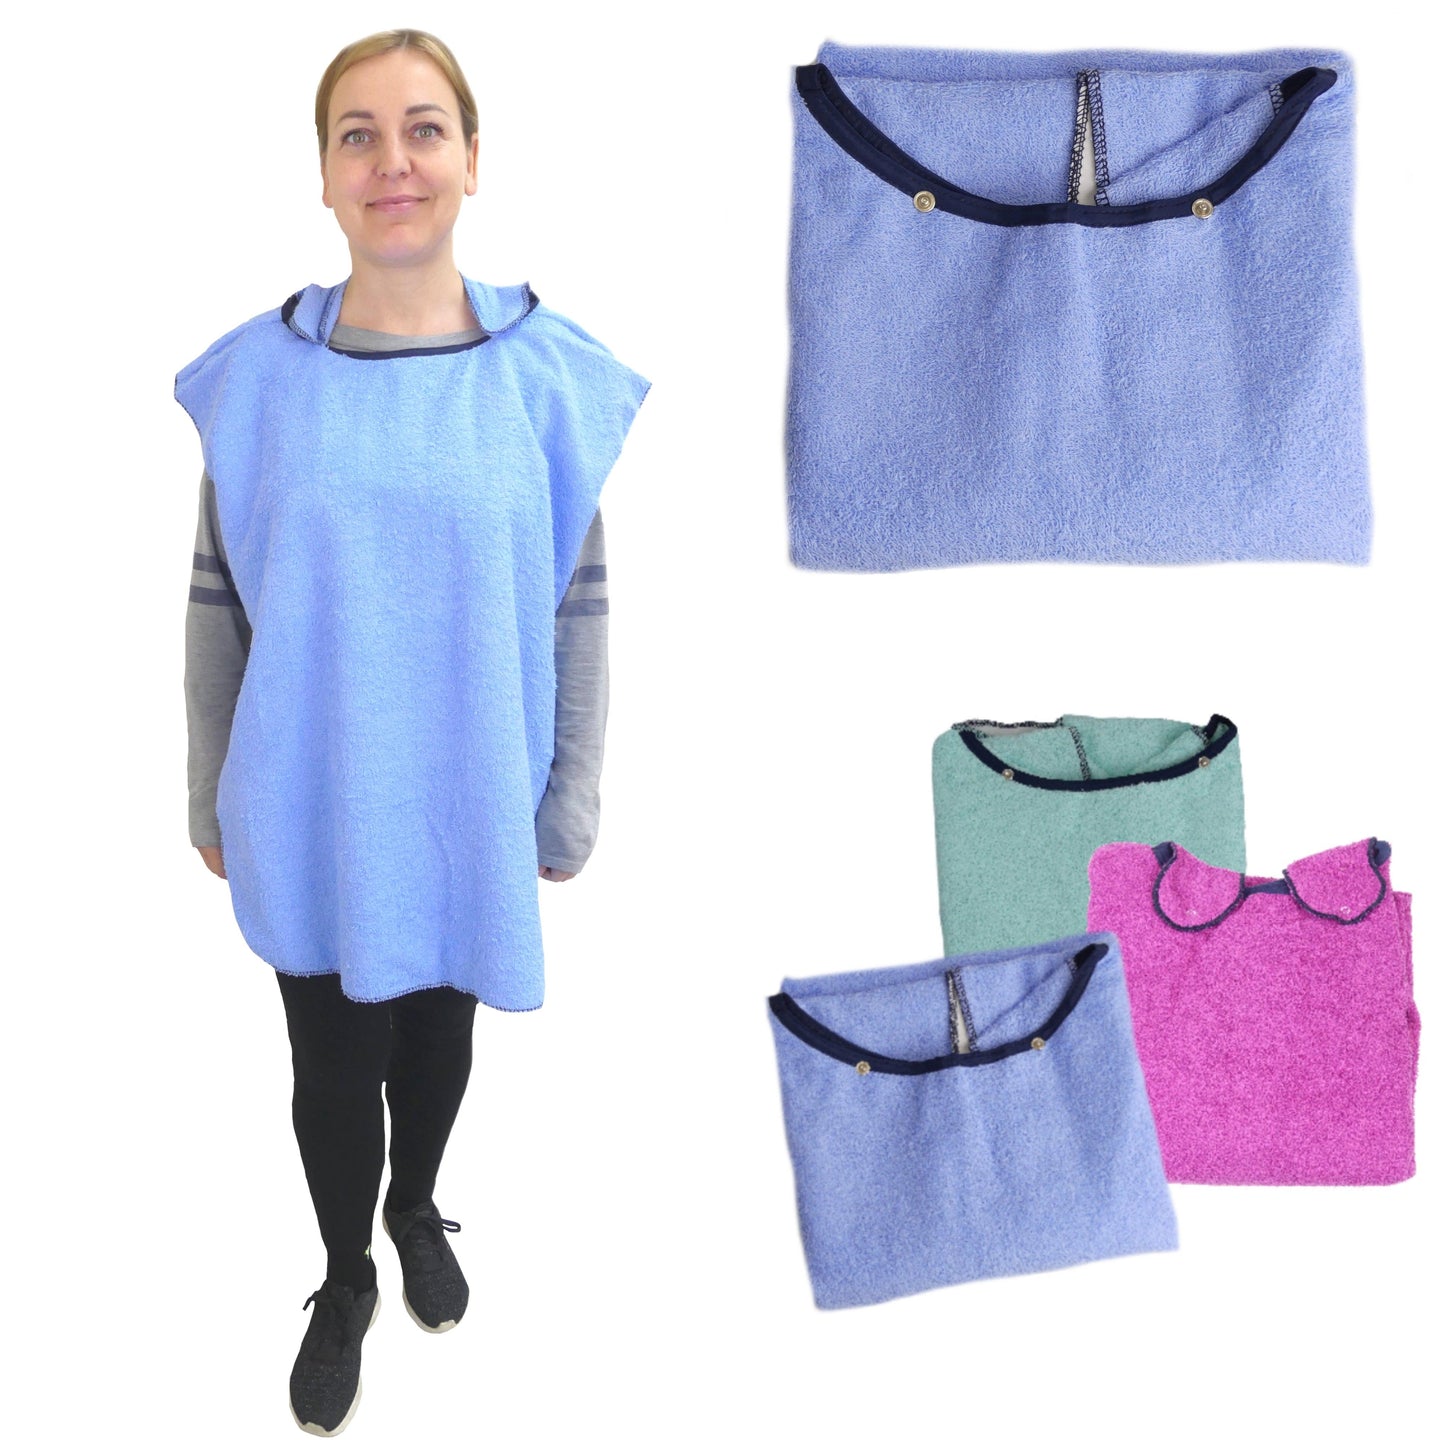 Eating and Drinking Aids: Towelling Feeding Cape with Waterproof Backing - M027 - MEDORIS